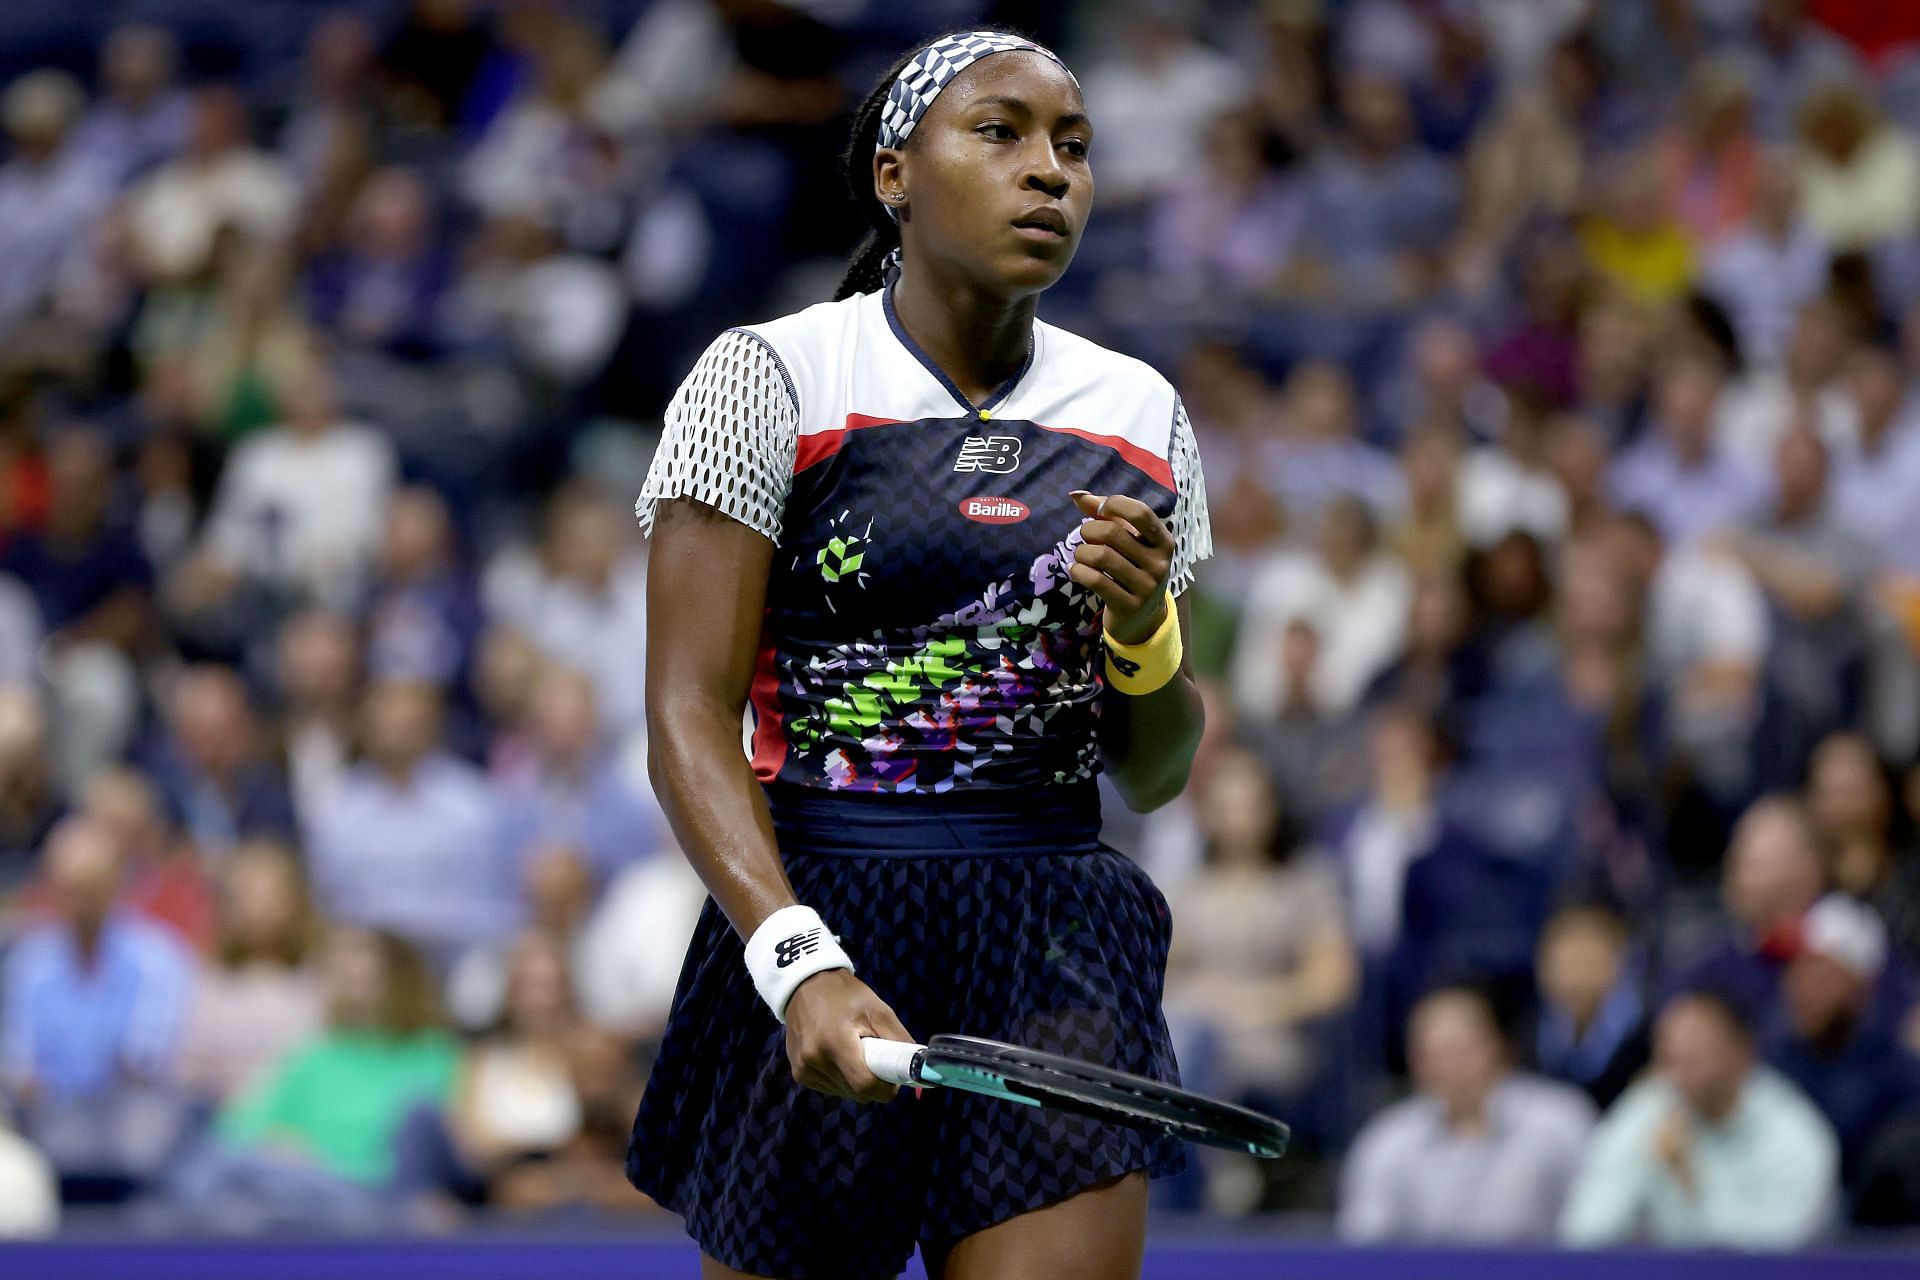 Evert paid tribute to Coco Gauff for showing at the 2022 US Open